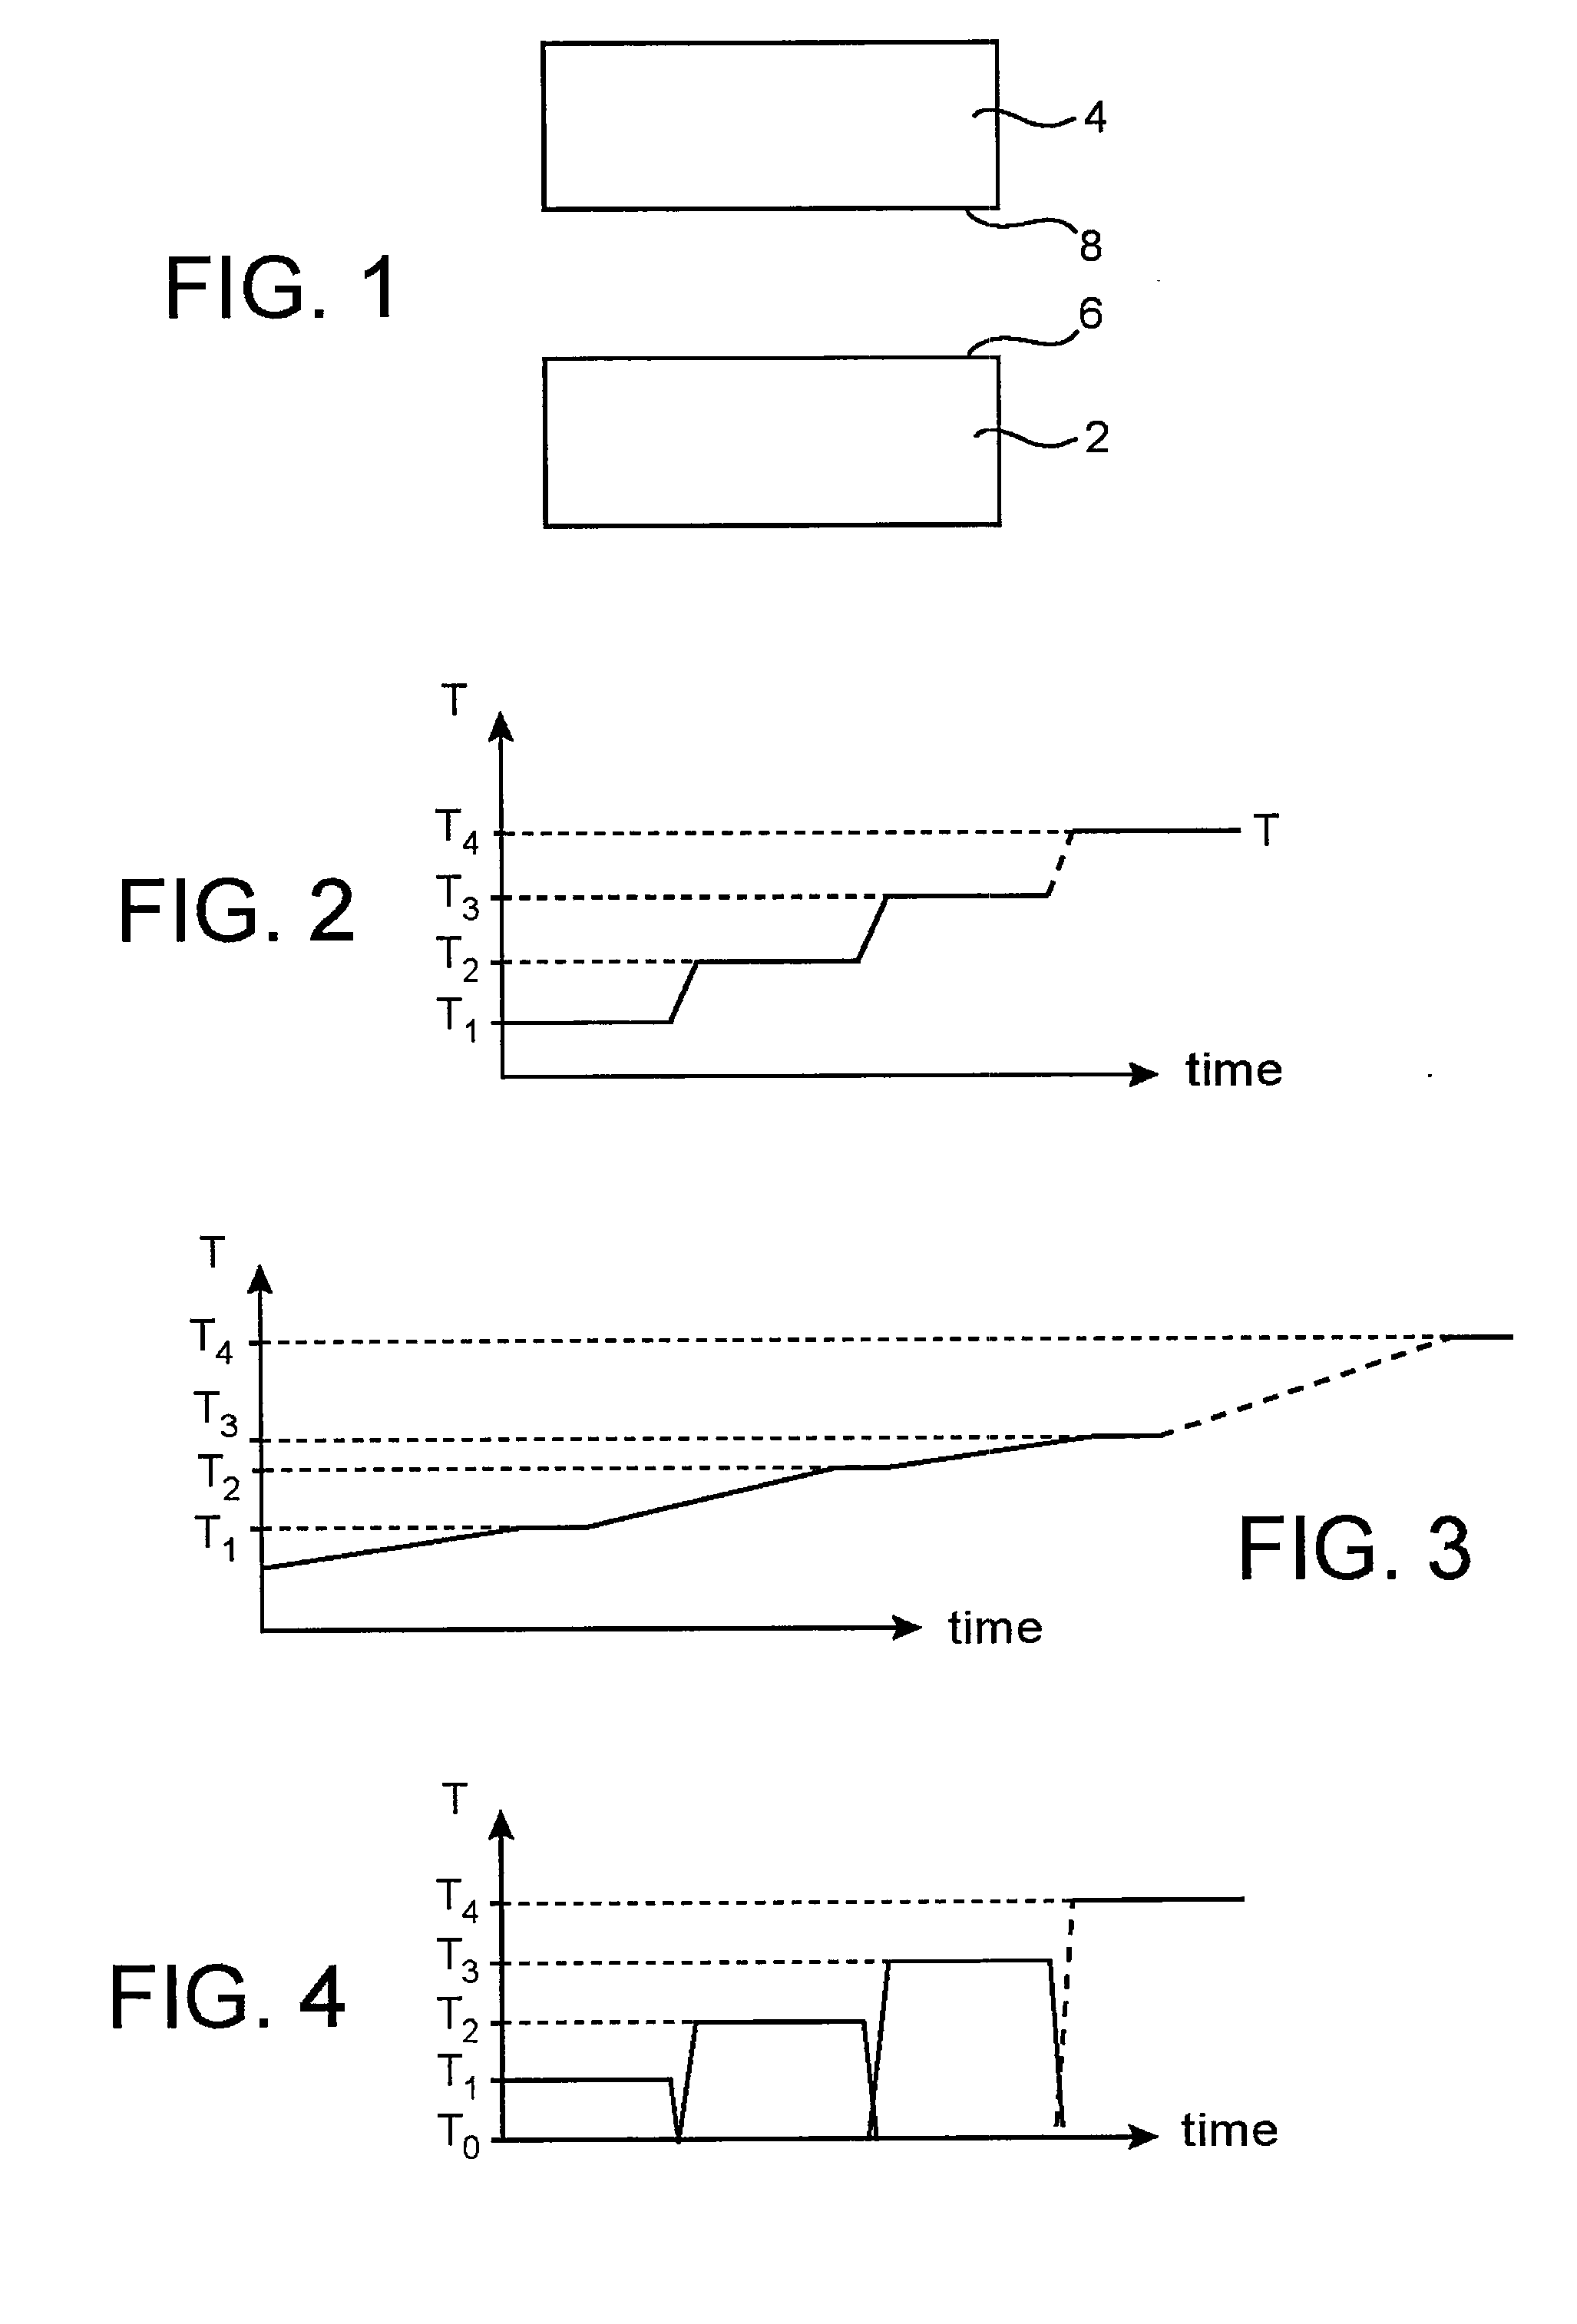 Process for assembling substrates with low-temperature heat treatments